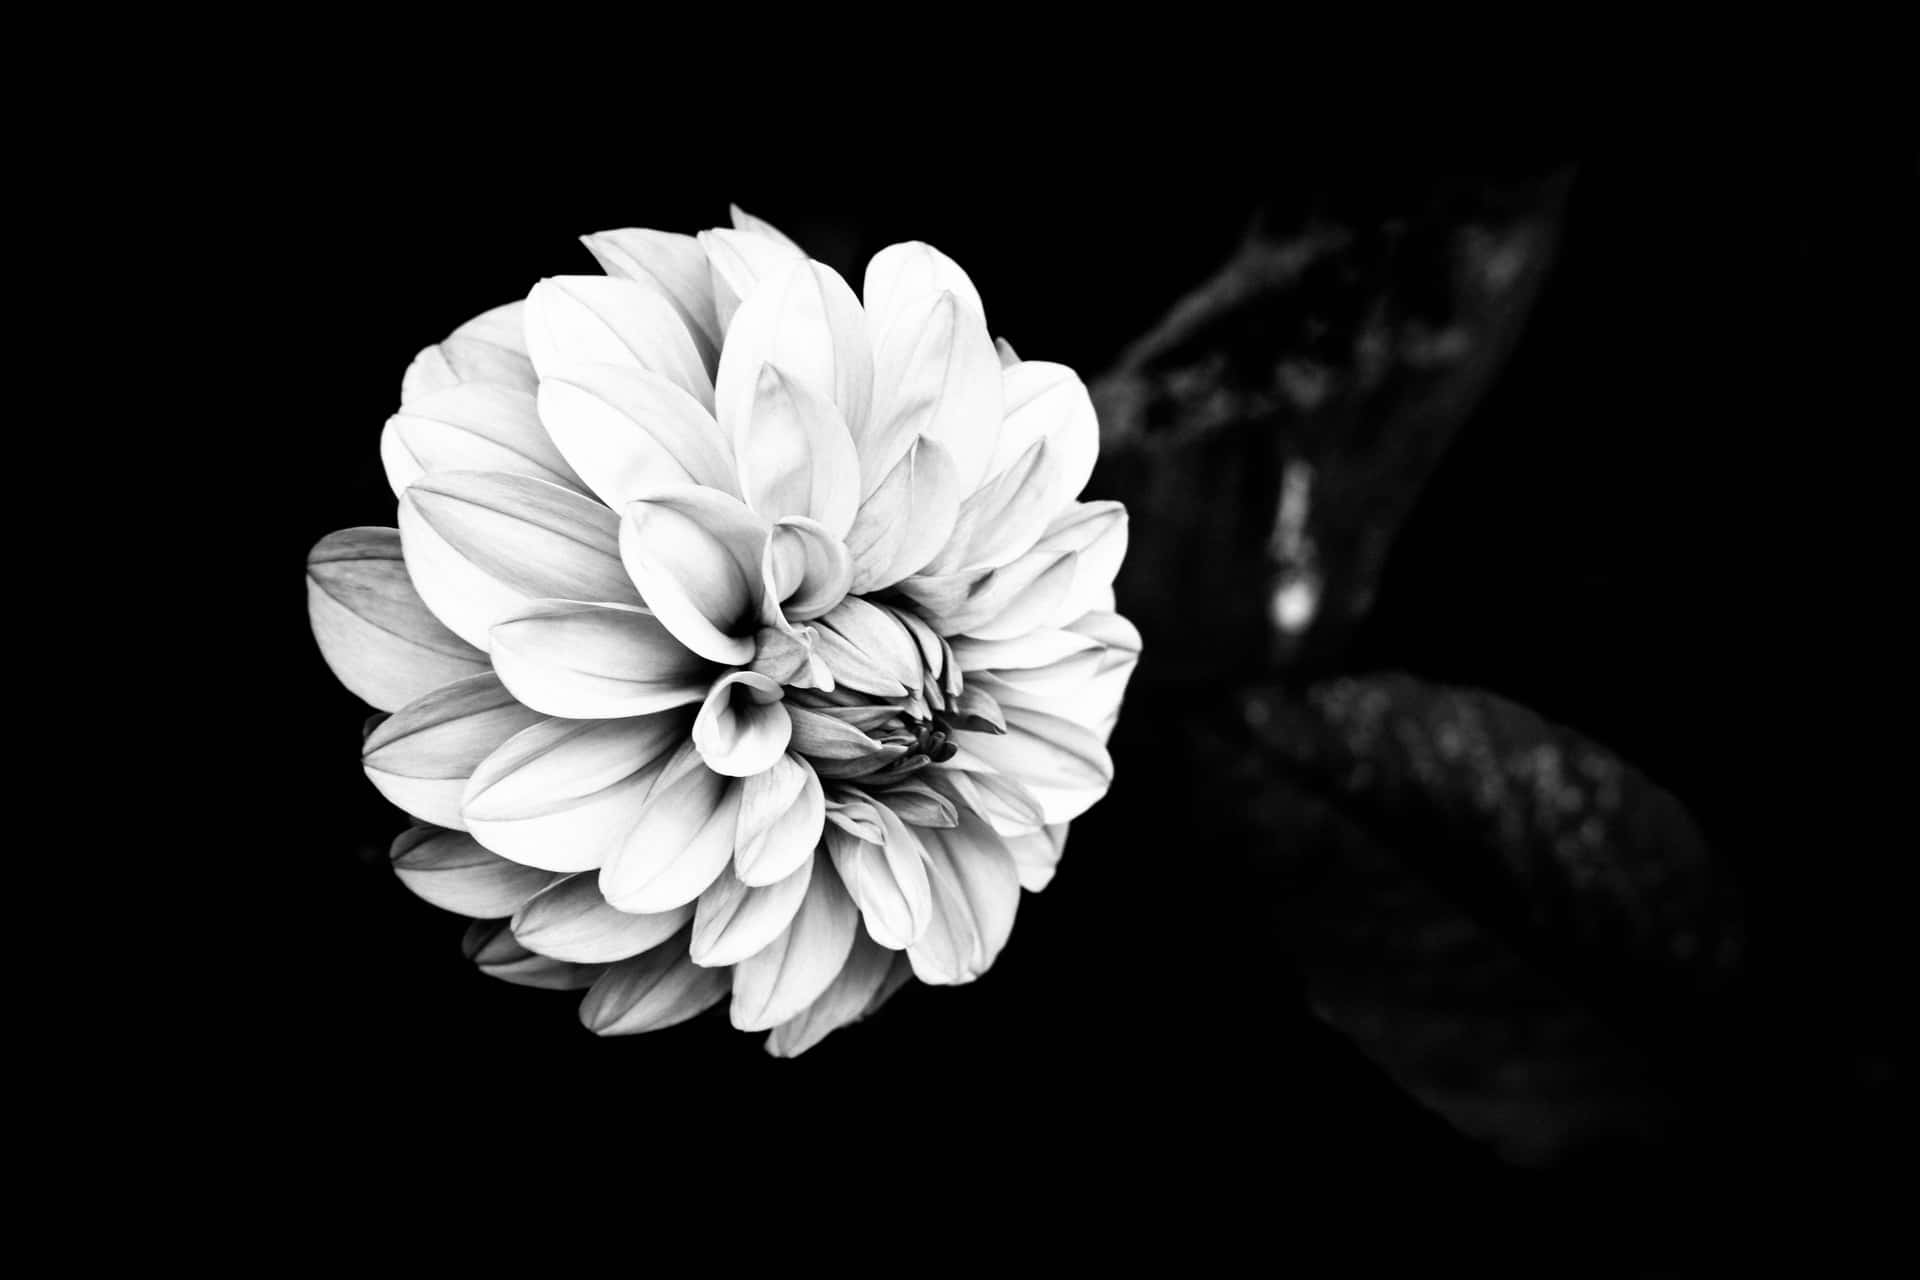 A stunning black and white flower